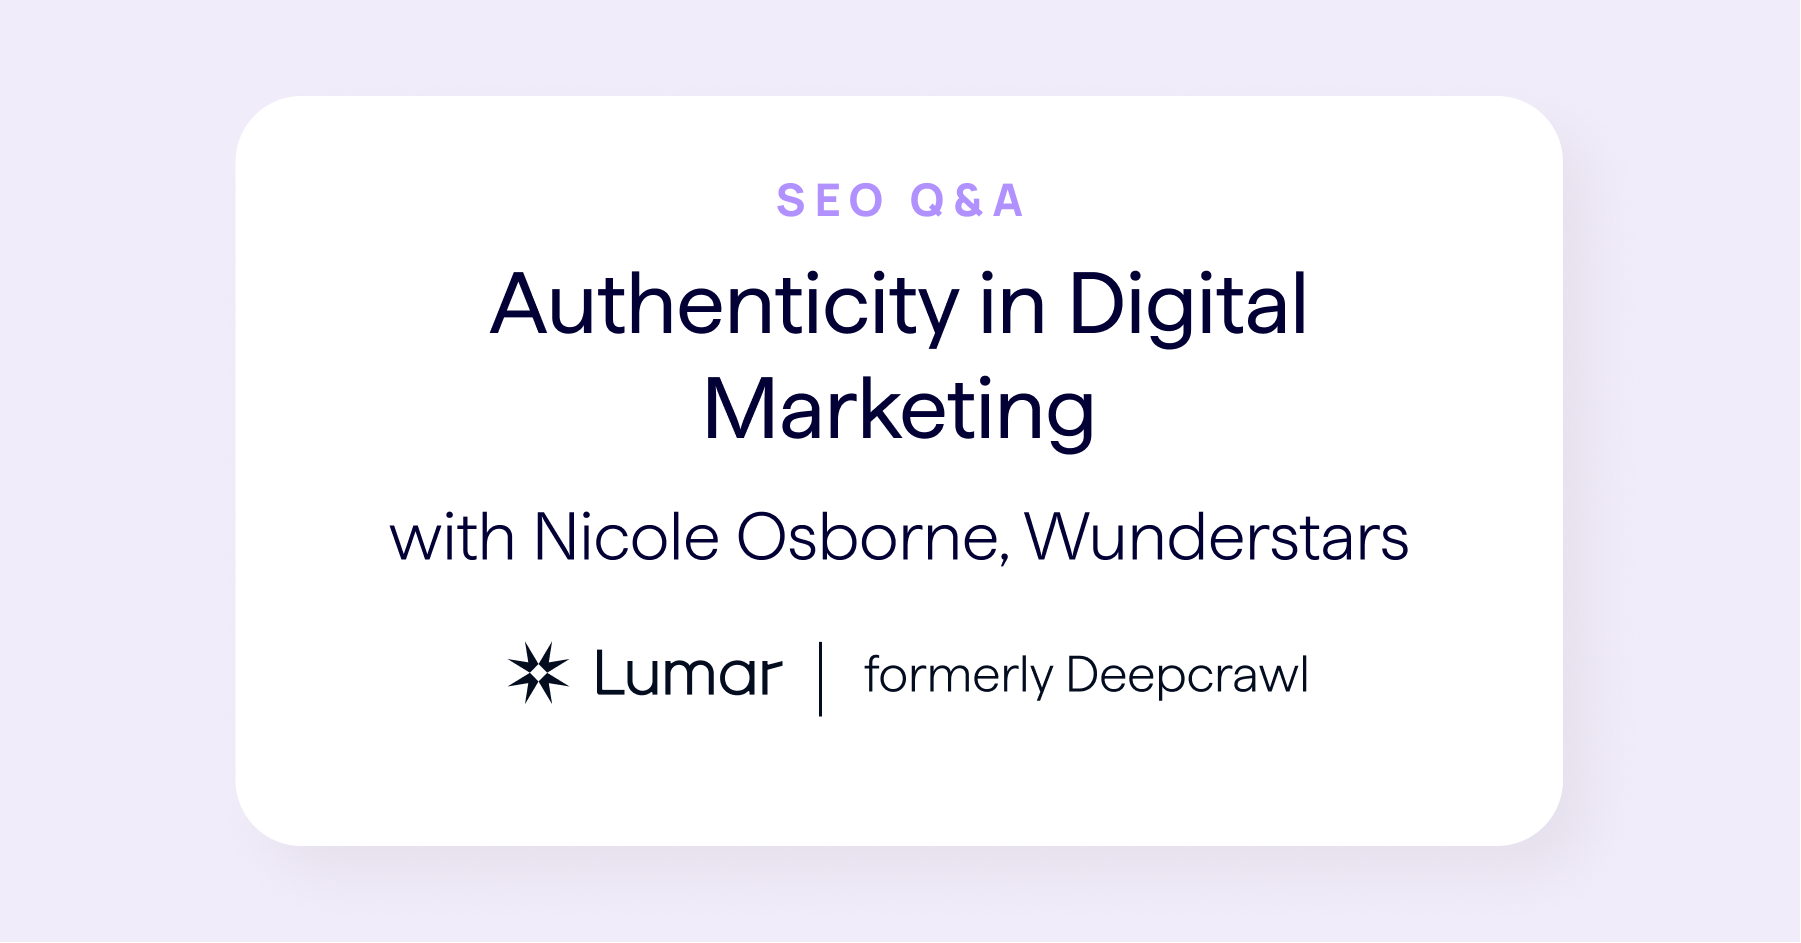 SEO interview - authenticity in digital marketing